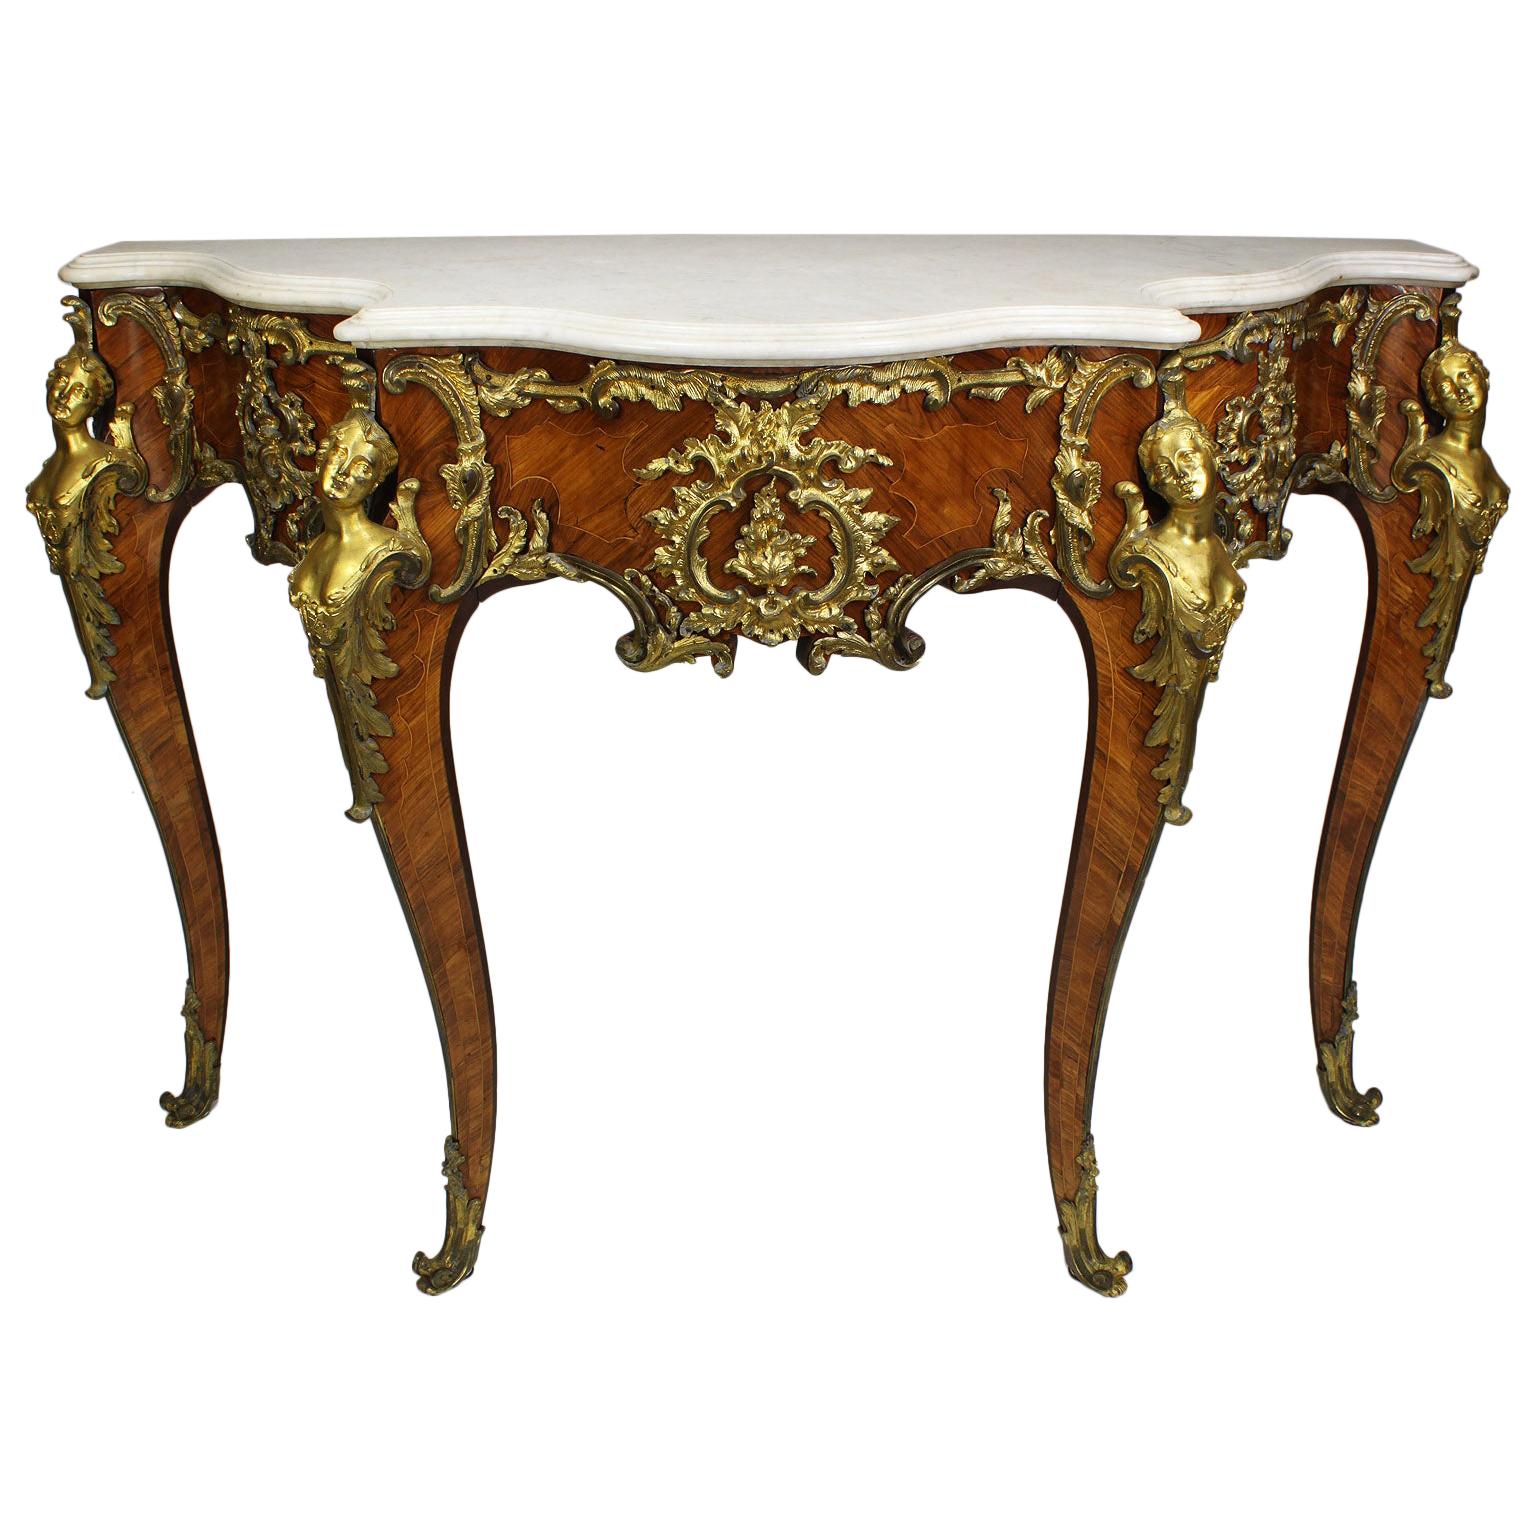 French 19th Century Louis XV Style Ormolu-Mounted Console After Charles Cressent For Sale